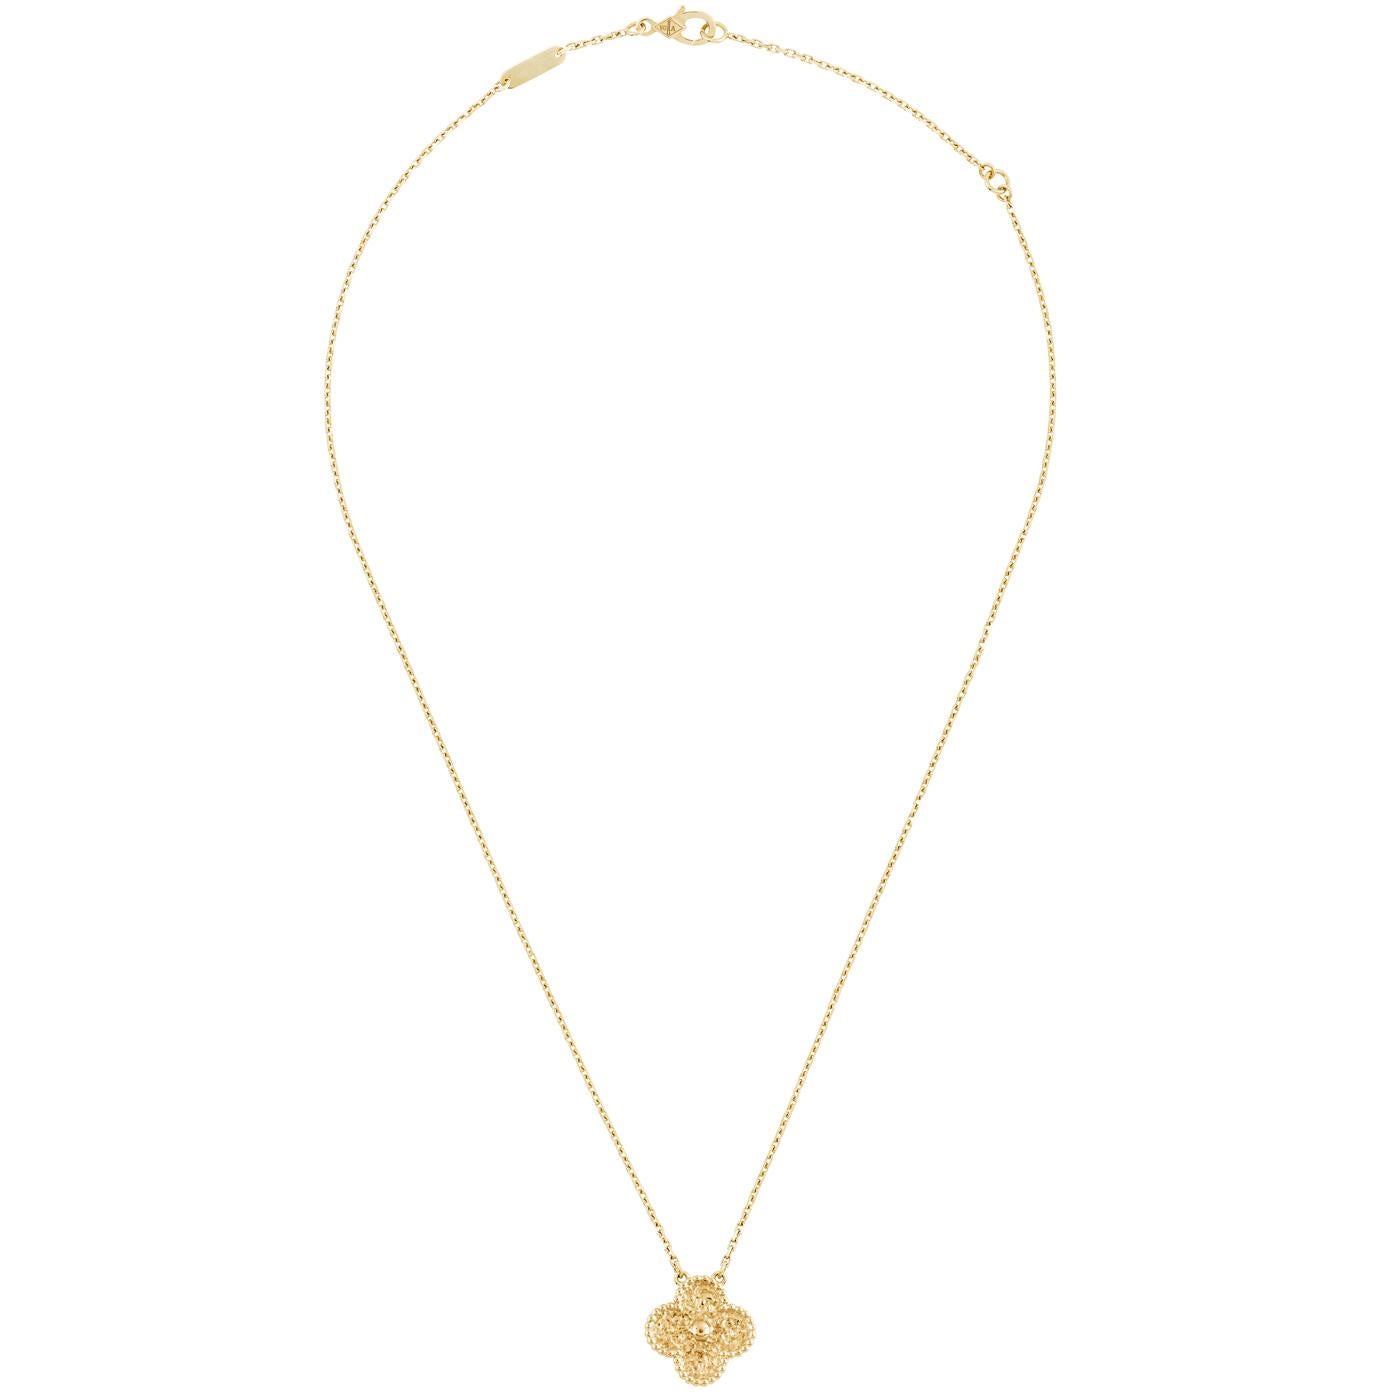 Faithful to the very first Alhambra jewel created in 1968, the Vintage Alhambra creations by Van Cleef & Arpels are distinguished by their unique, timeless elegance. Inspired by the clover leaf, these icons of luck are adorned with a border of